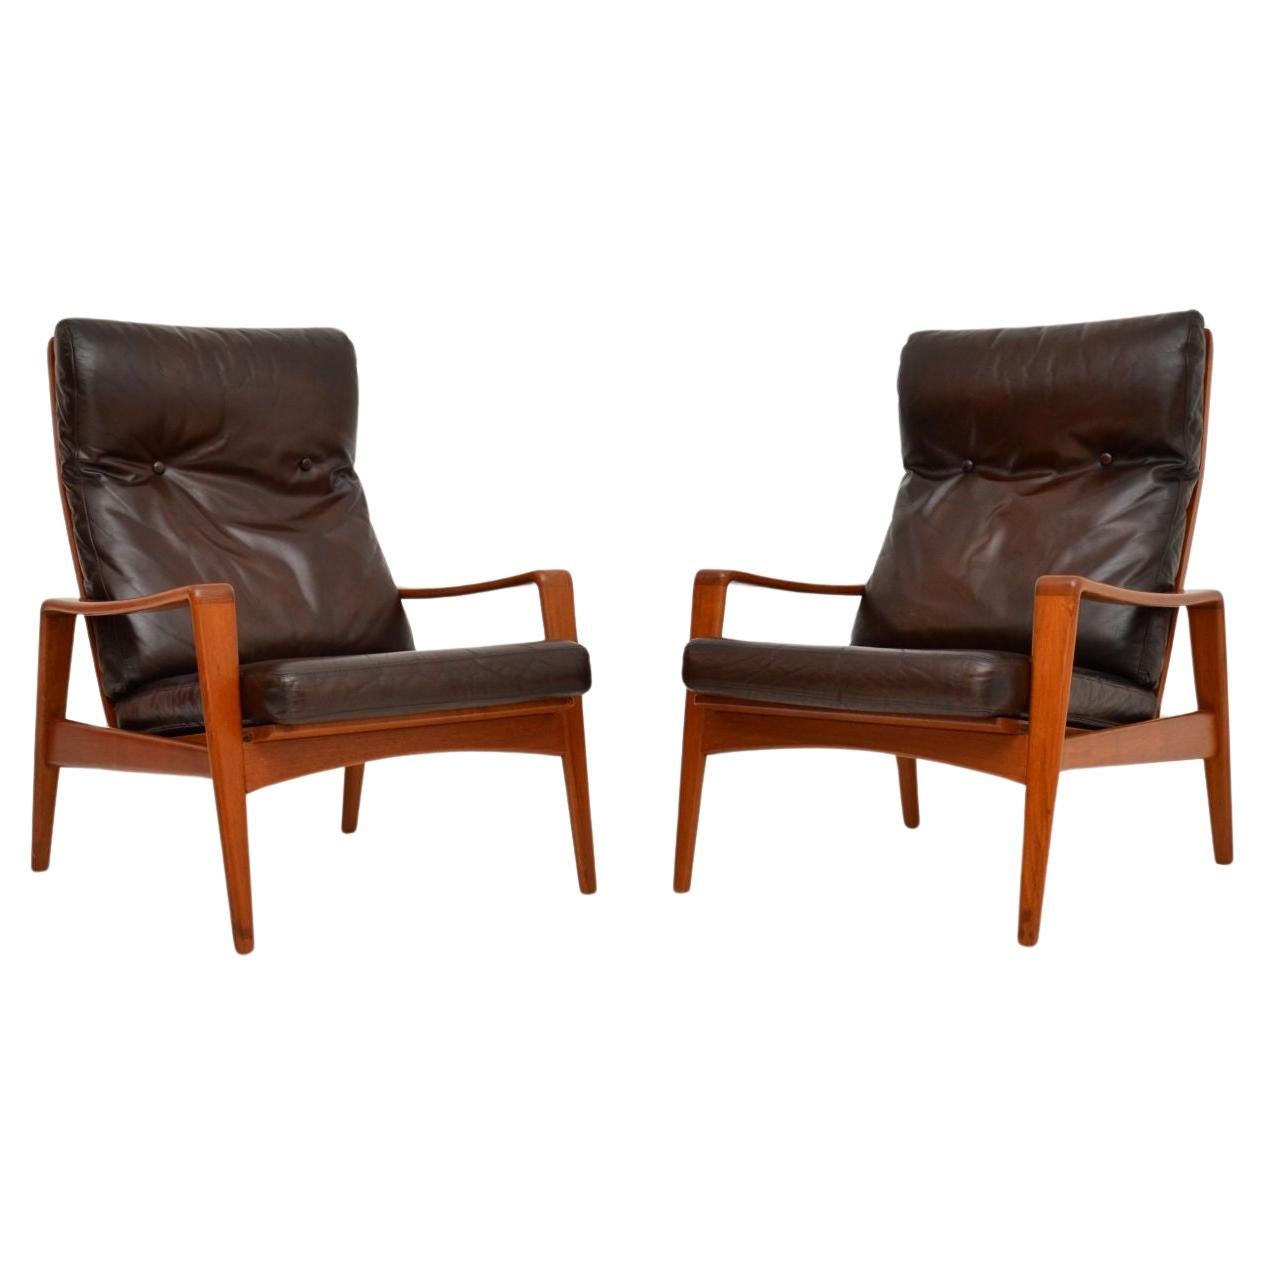 Pair of Danish Vintage Teak and Leather Armchairs by Arne Wahl Iversen For Sale